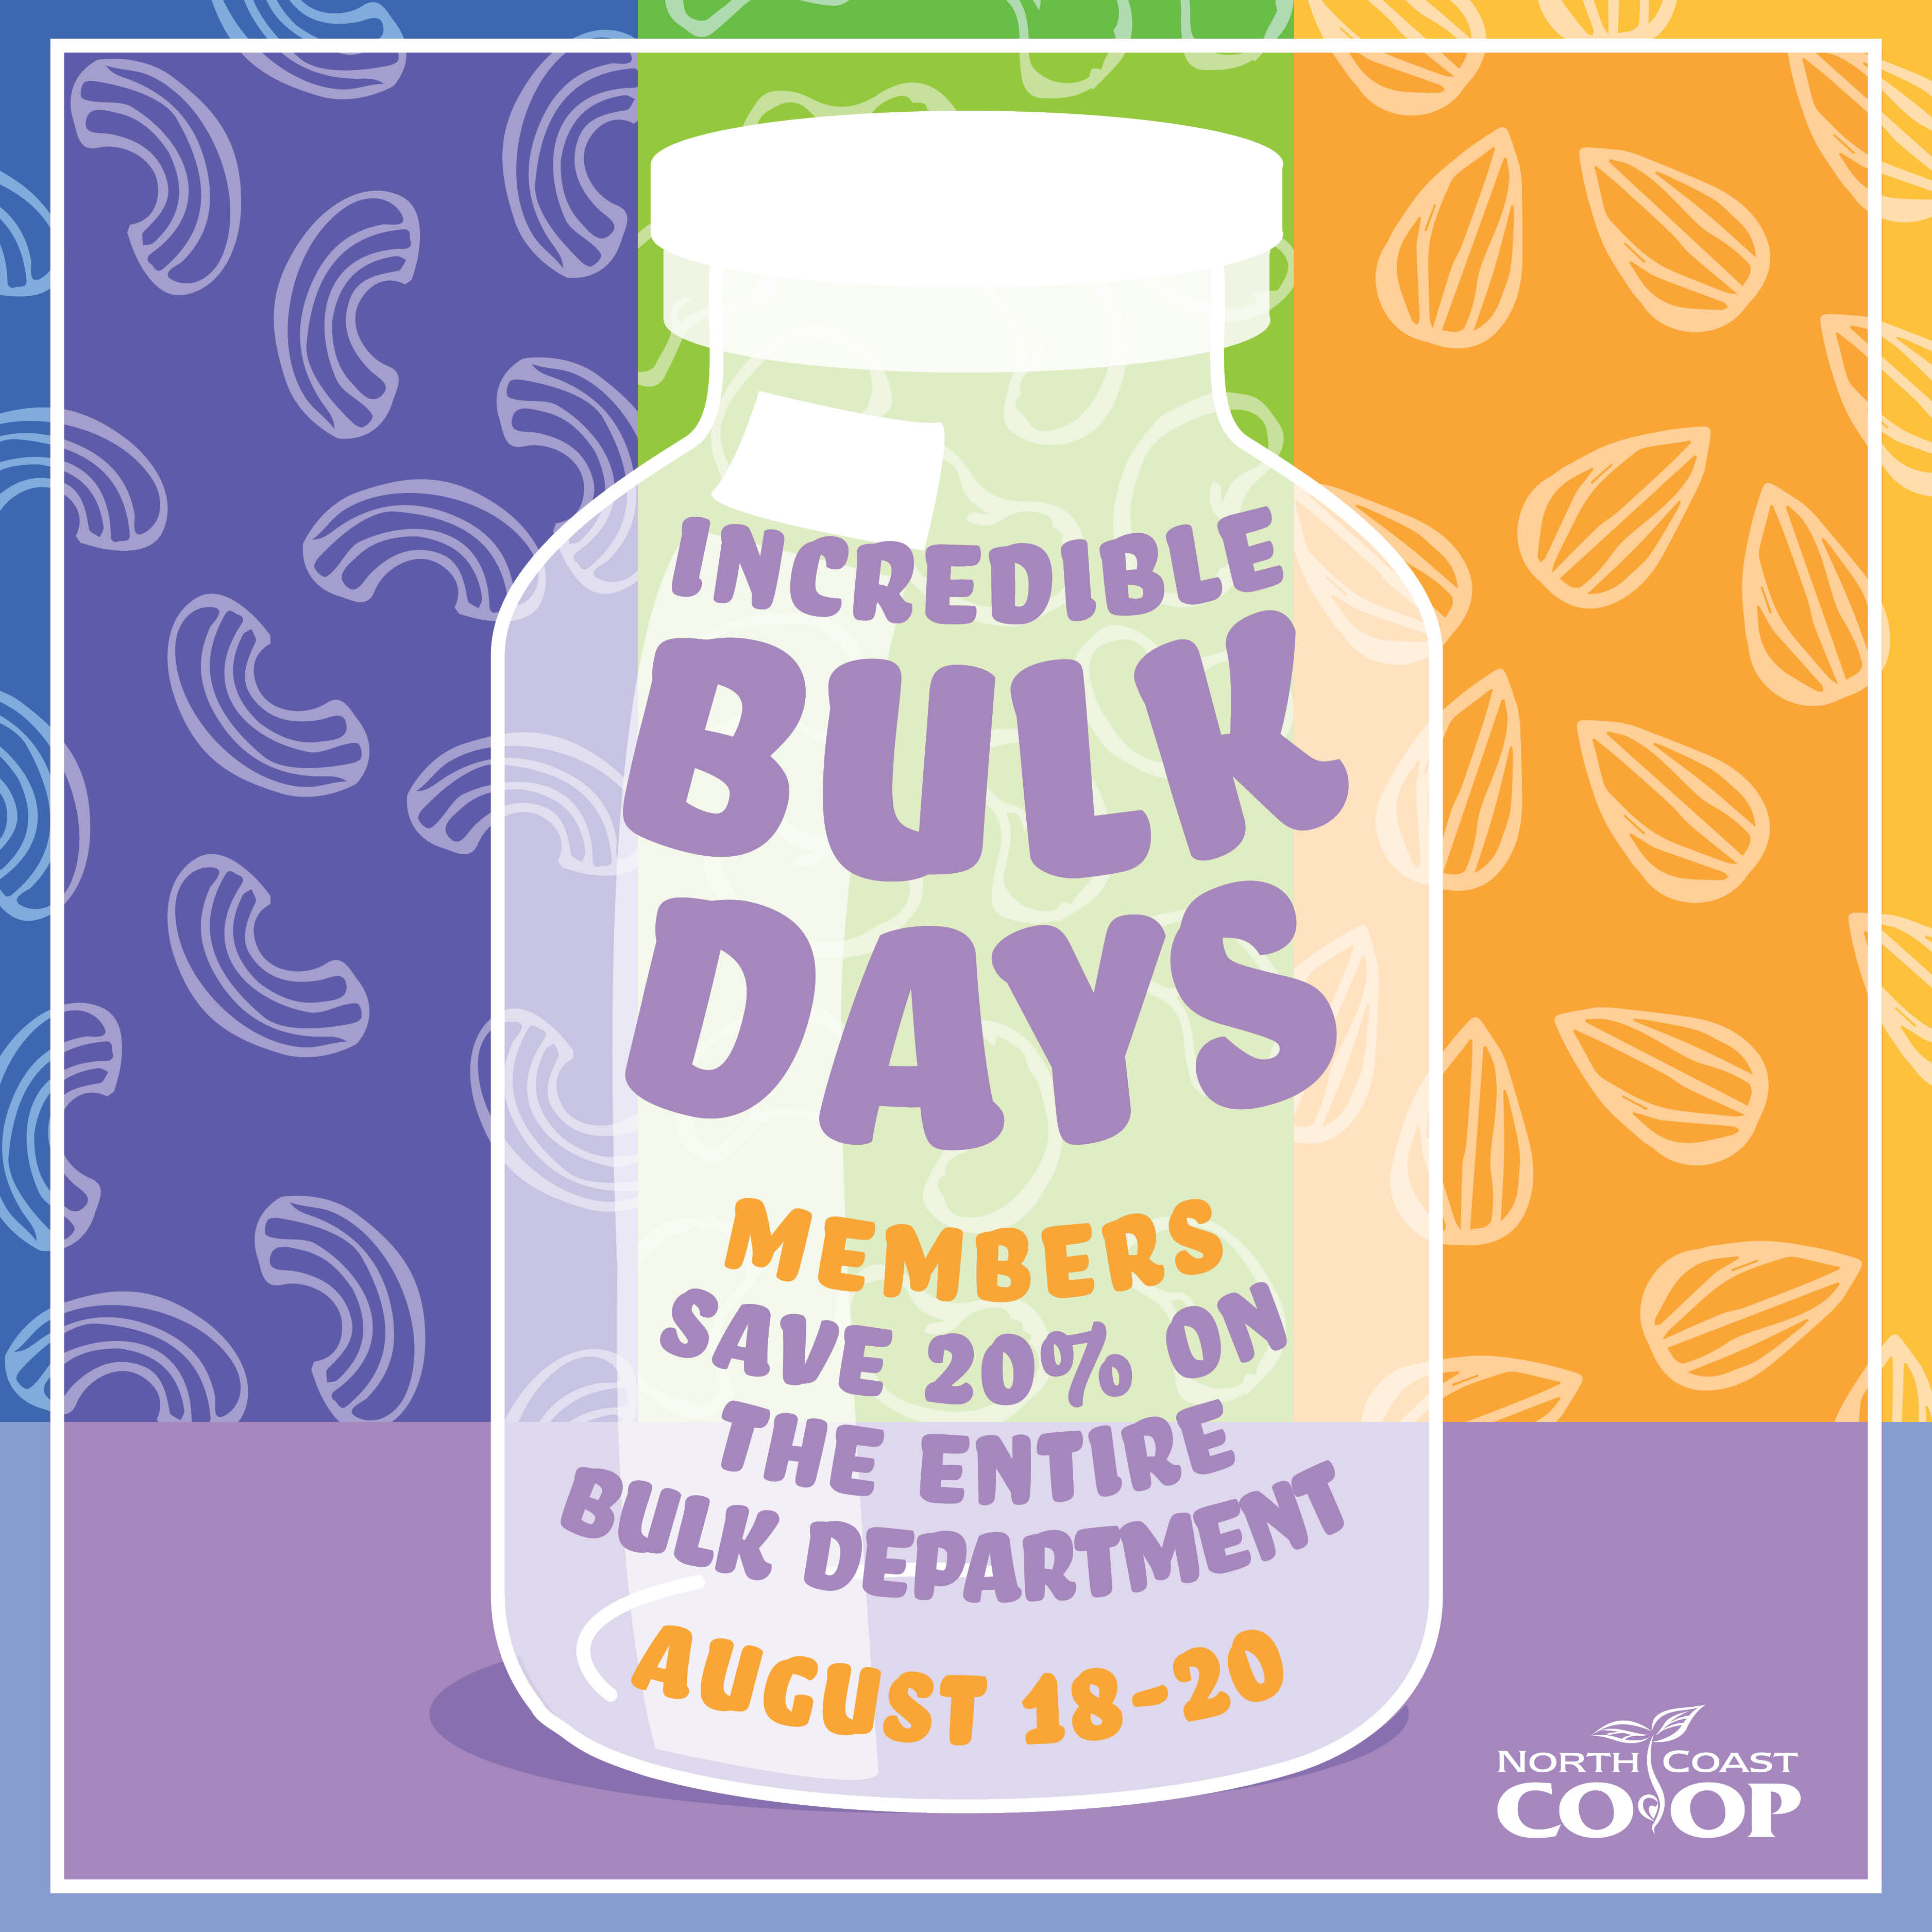 Incredible Bulk Days is Coming! · North Coast Co-op